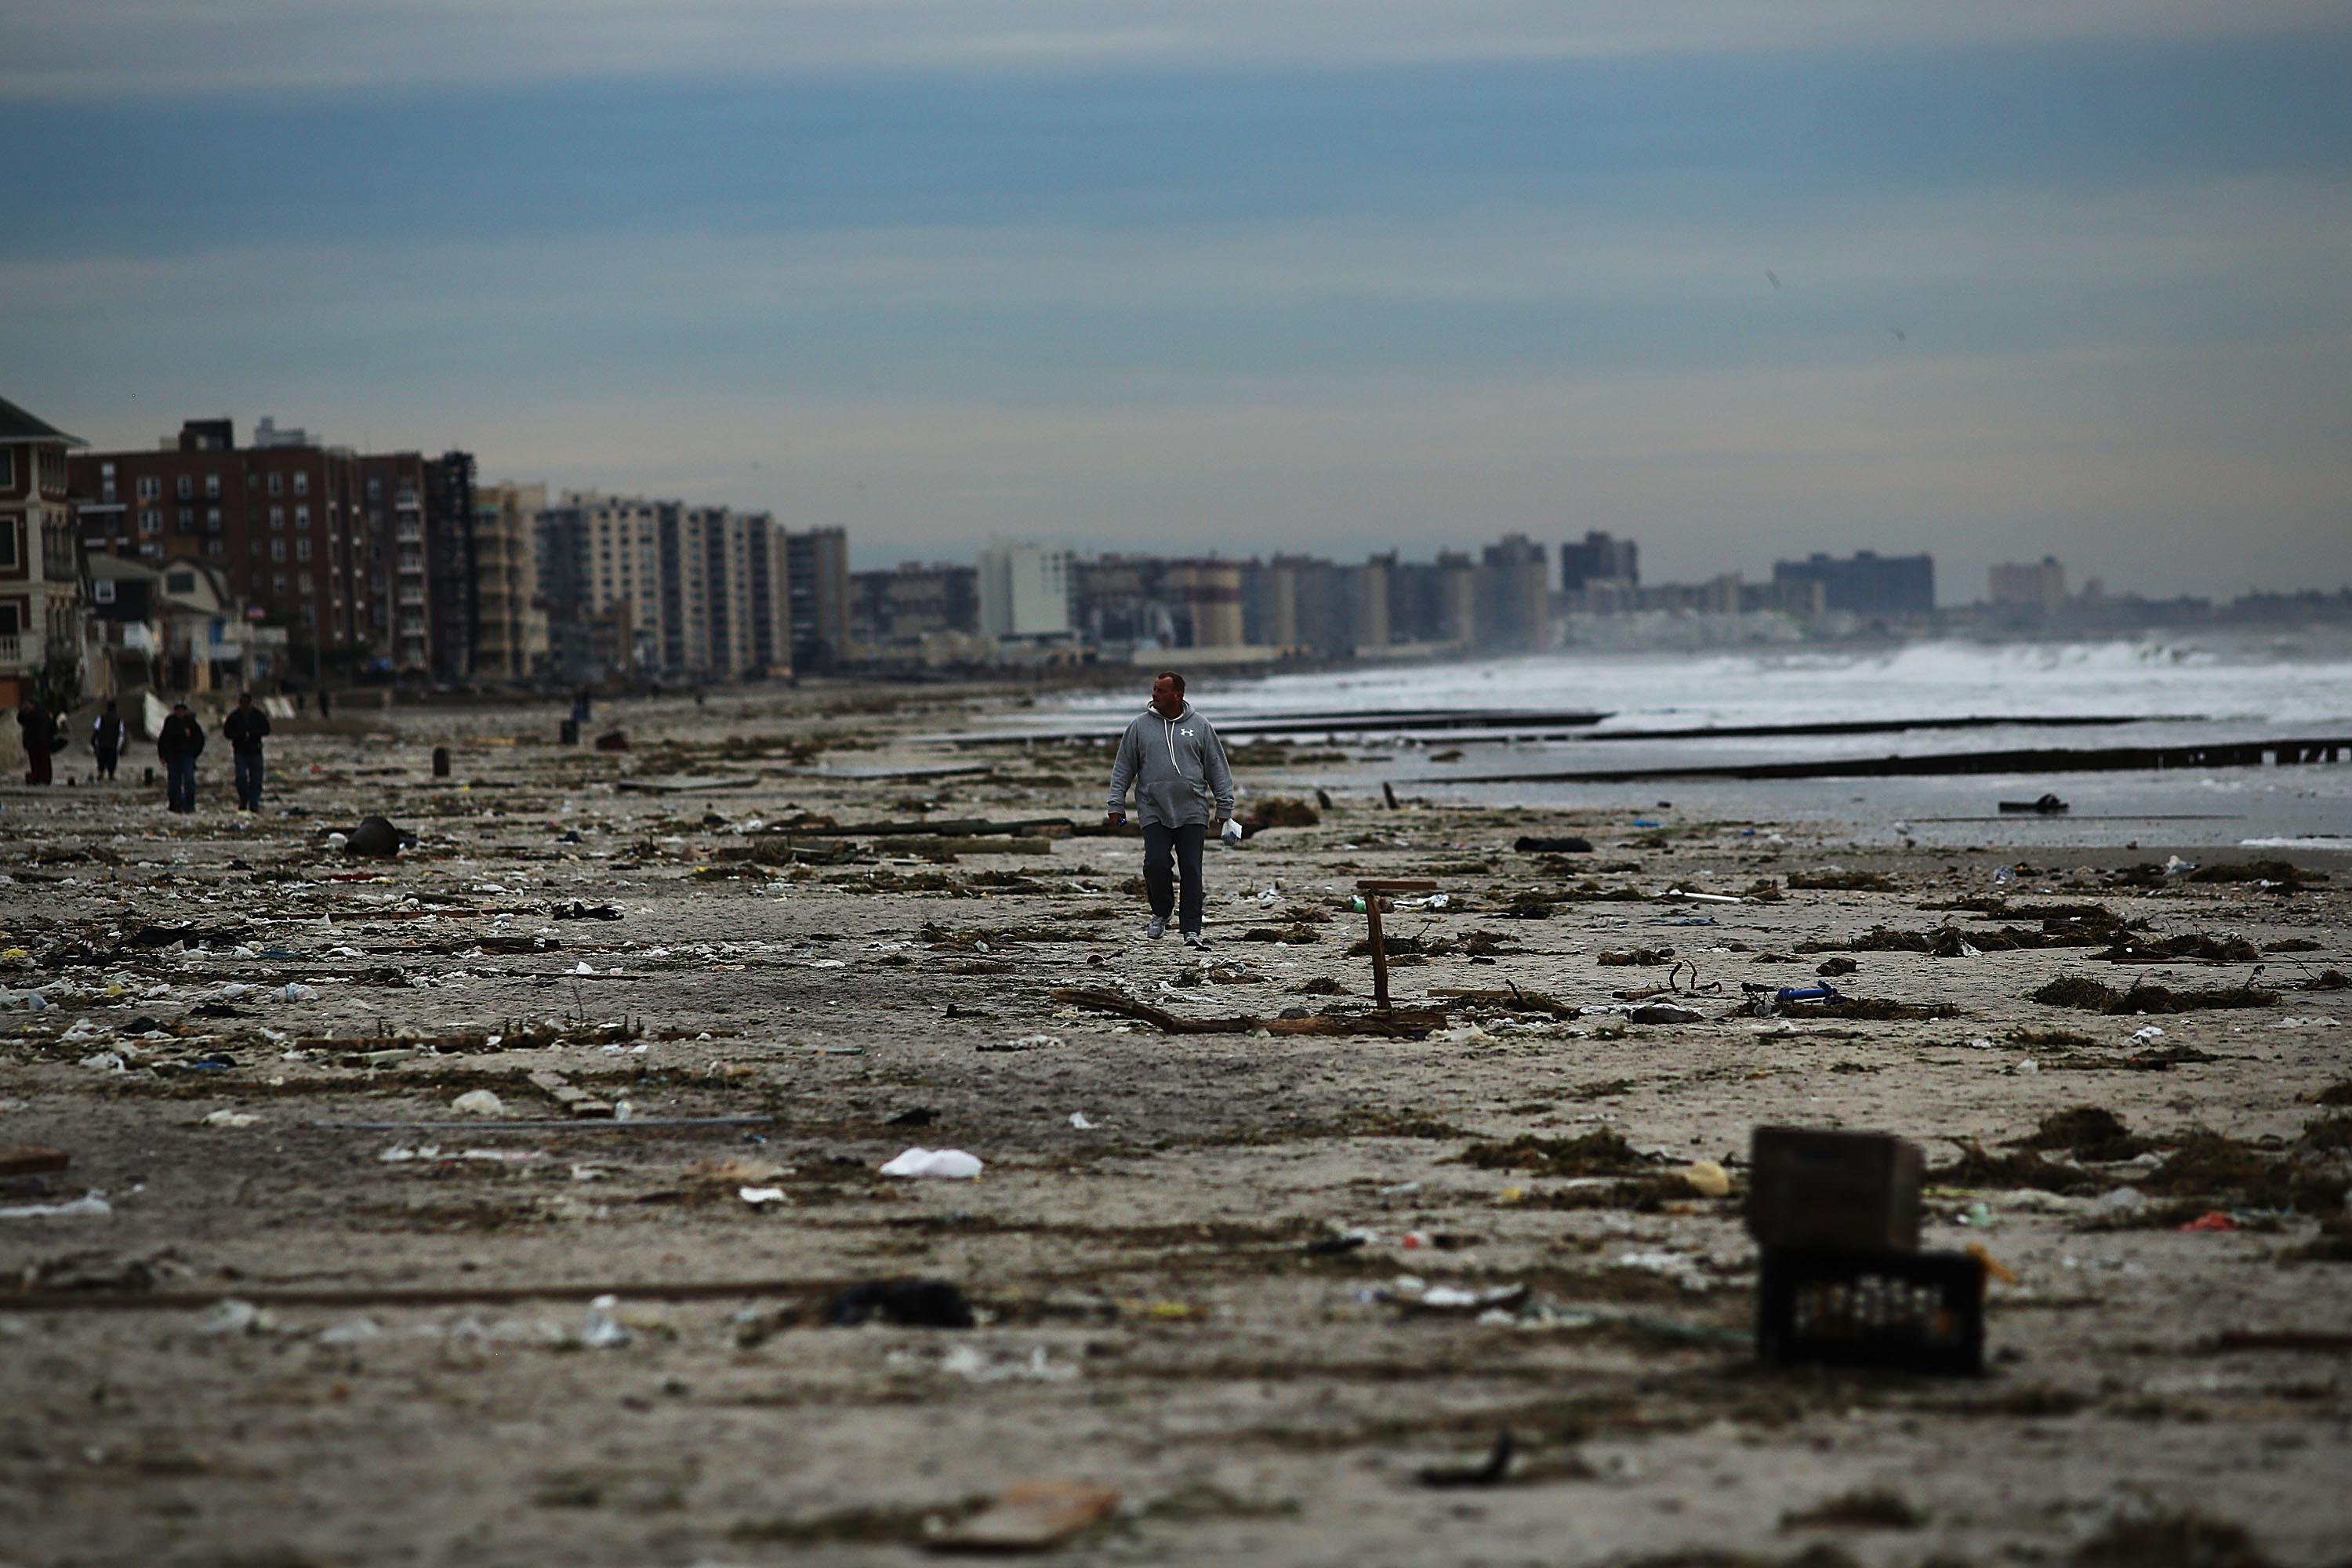 A man walks along the beach in the heavily damaged Rockaway neighborhood, in Queens where a large section of the iconic boardwalk was washed away on November 2, 2012 in New York.